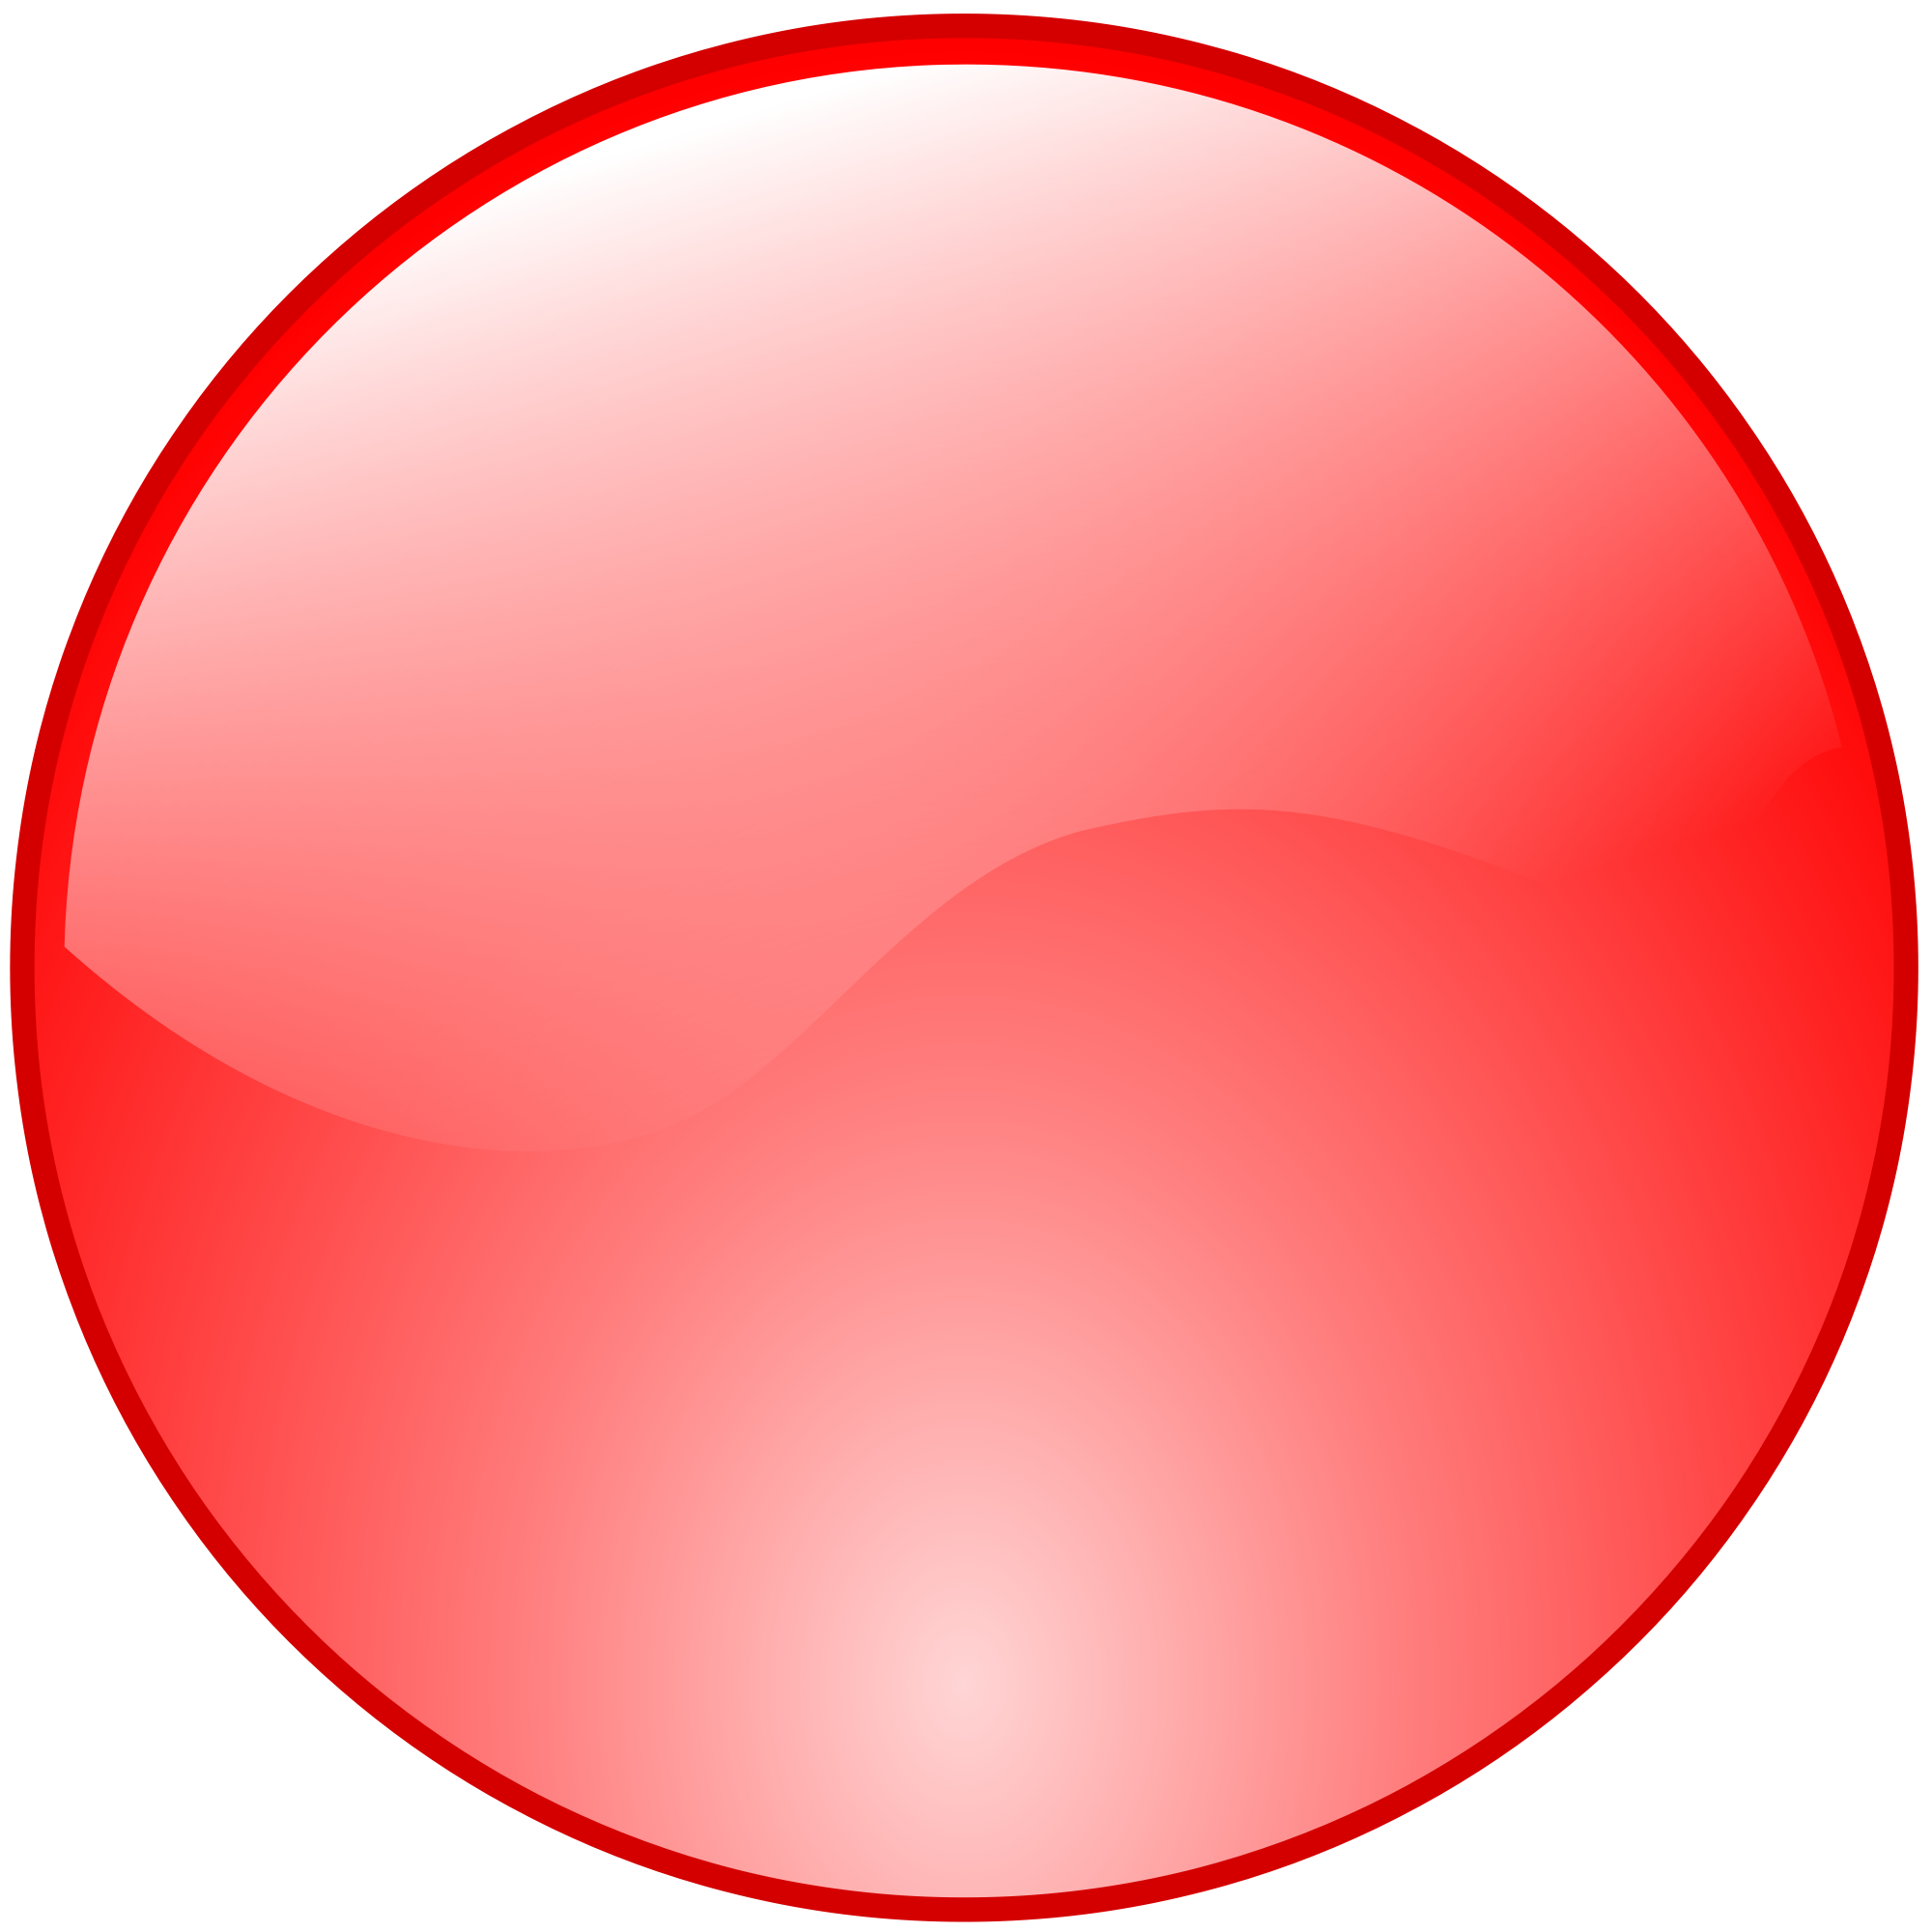 Red button clipart. Free download transparent .PNG